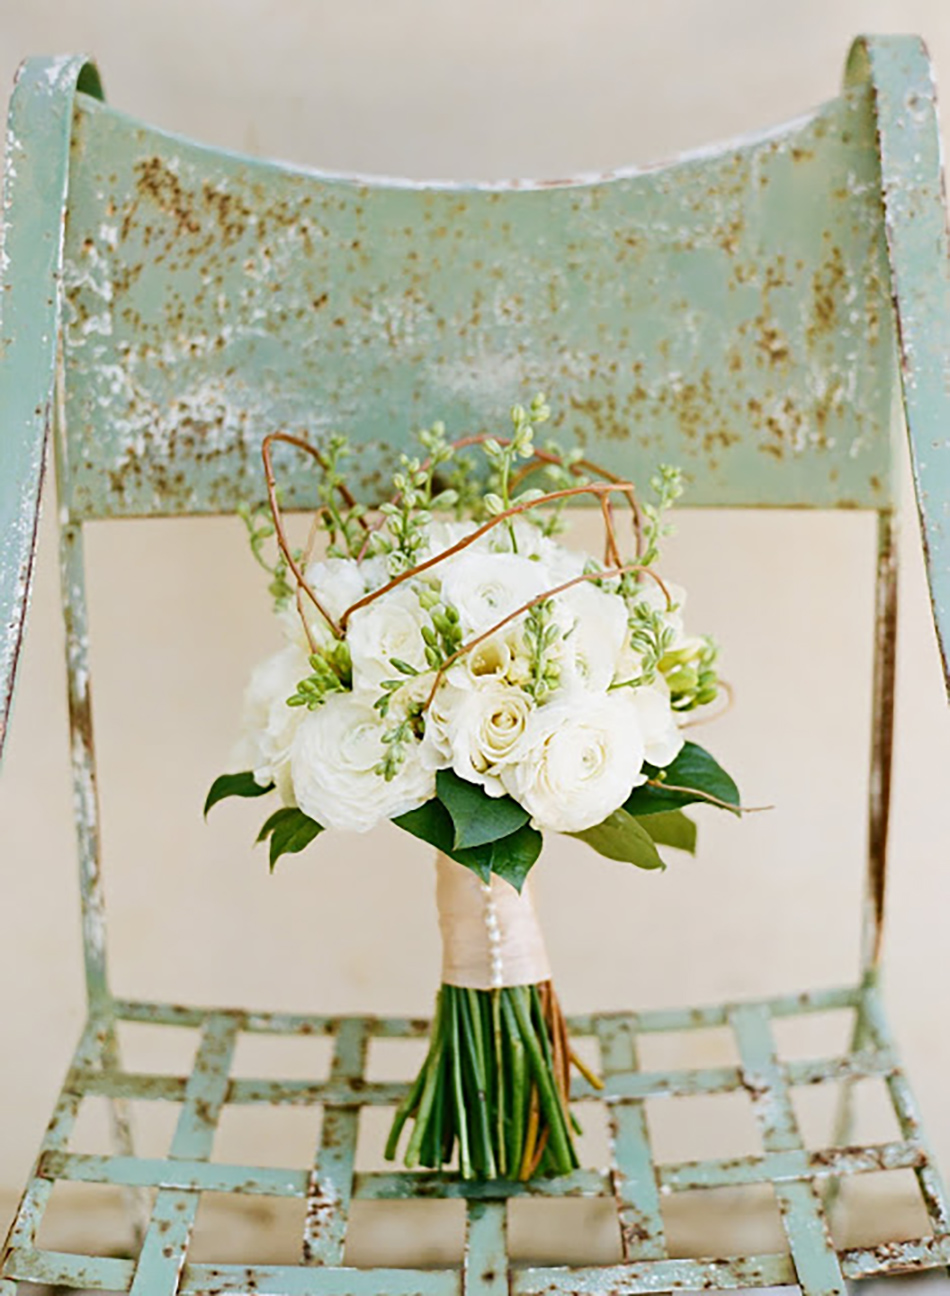 25 ideas for a St Patrick's themed wedding